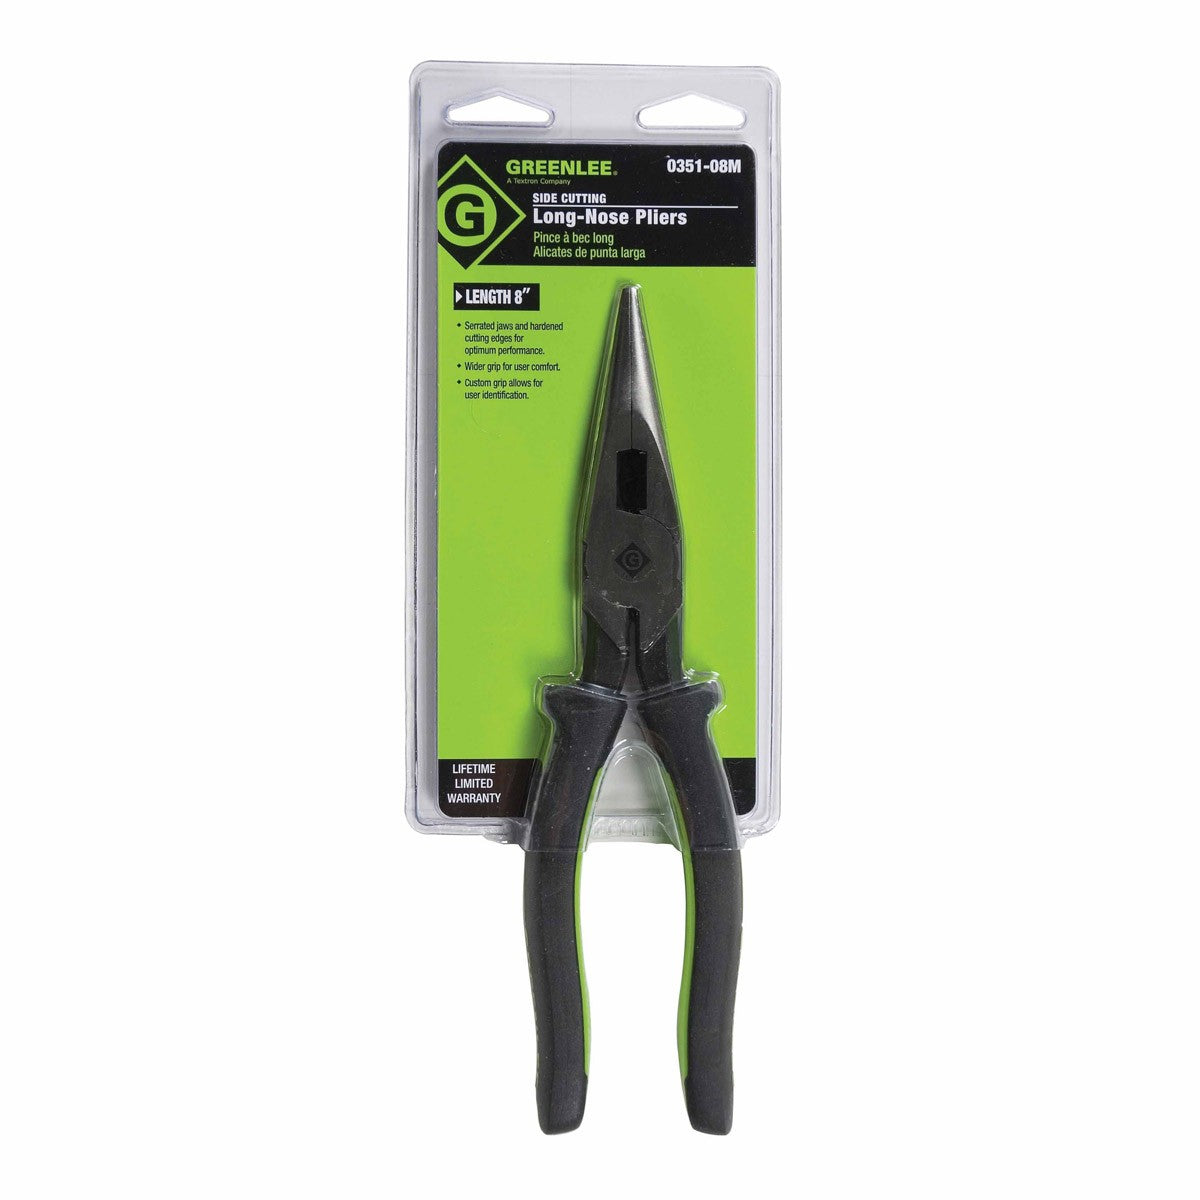 Greenlee 0351-08M Long Nose Pliers/Side Cutting 8" Molded Grip